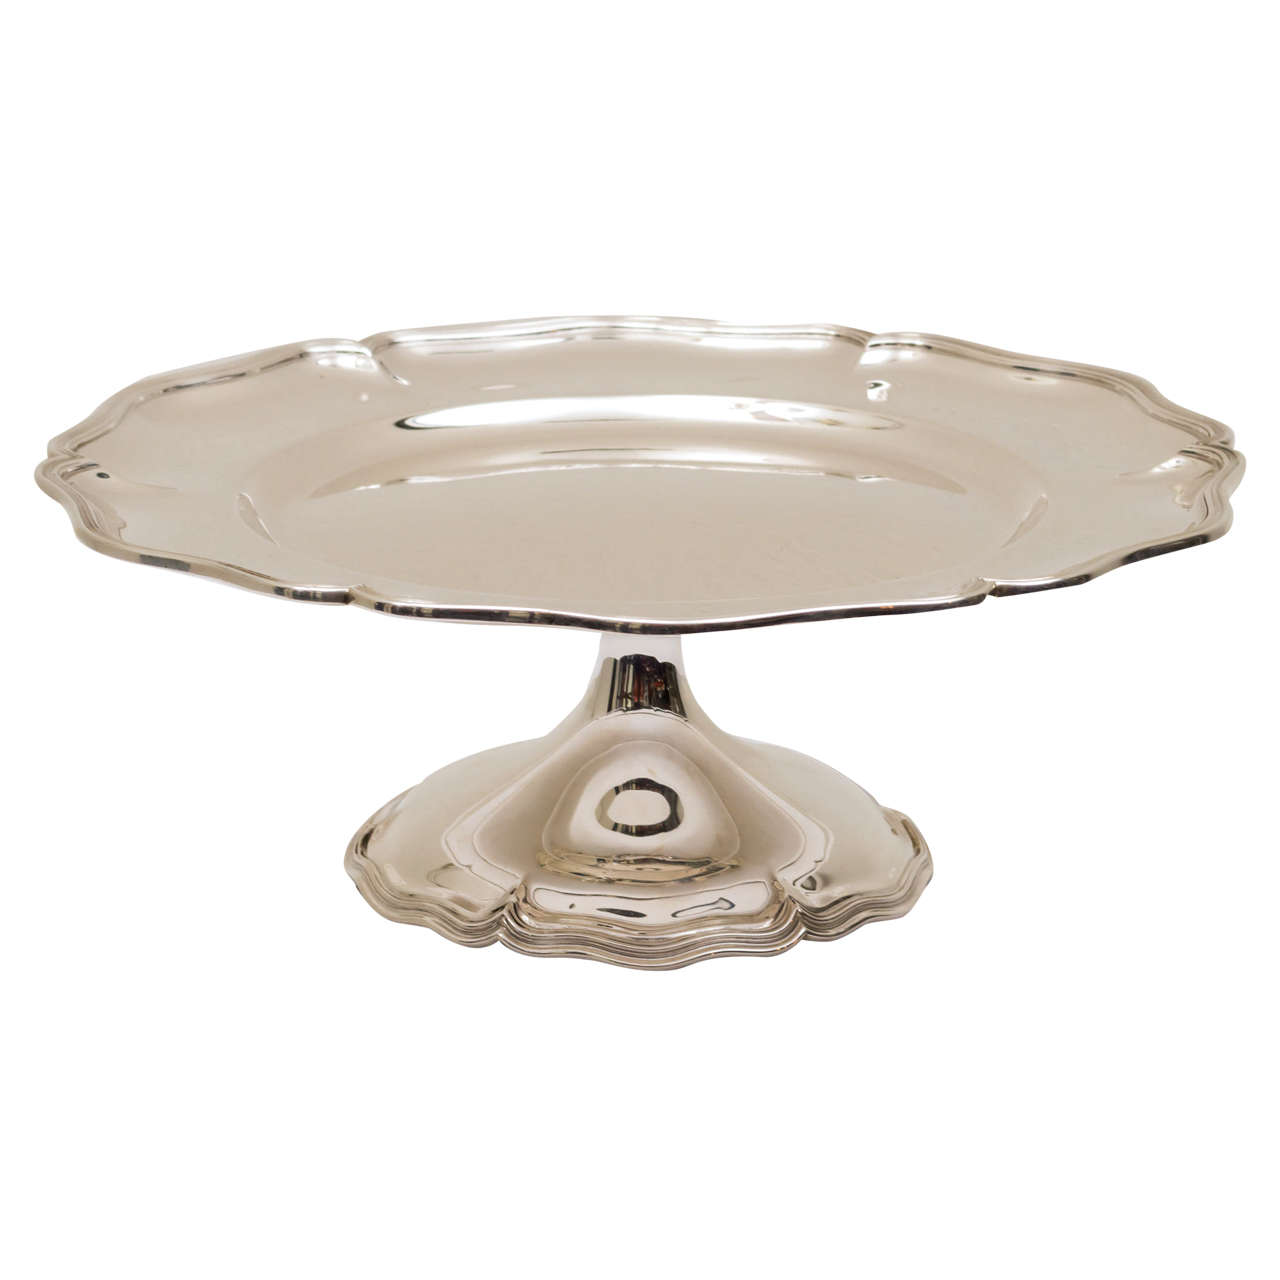 Art Nouveau Sterling Silver Cake Stand by Shreve & Co. SF